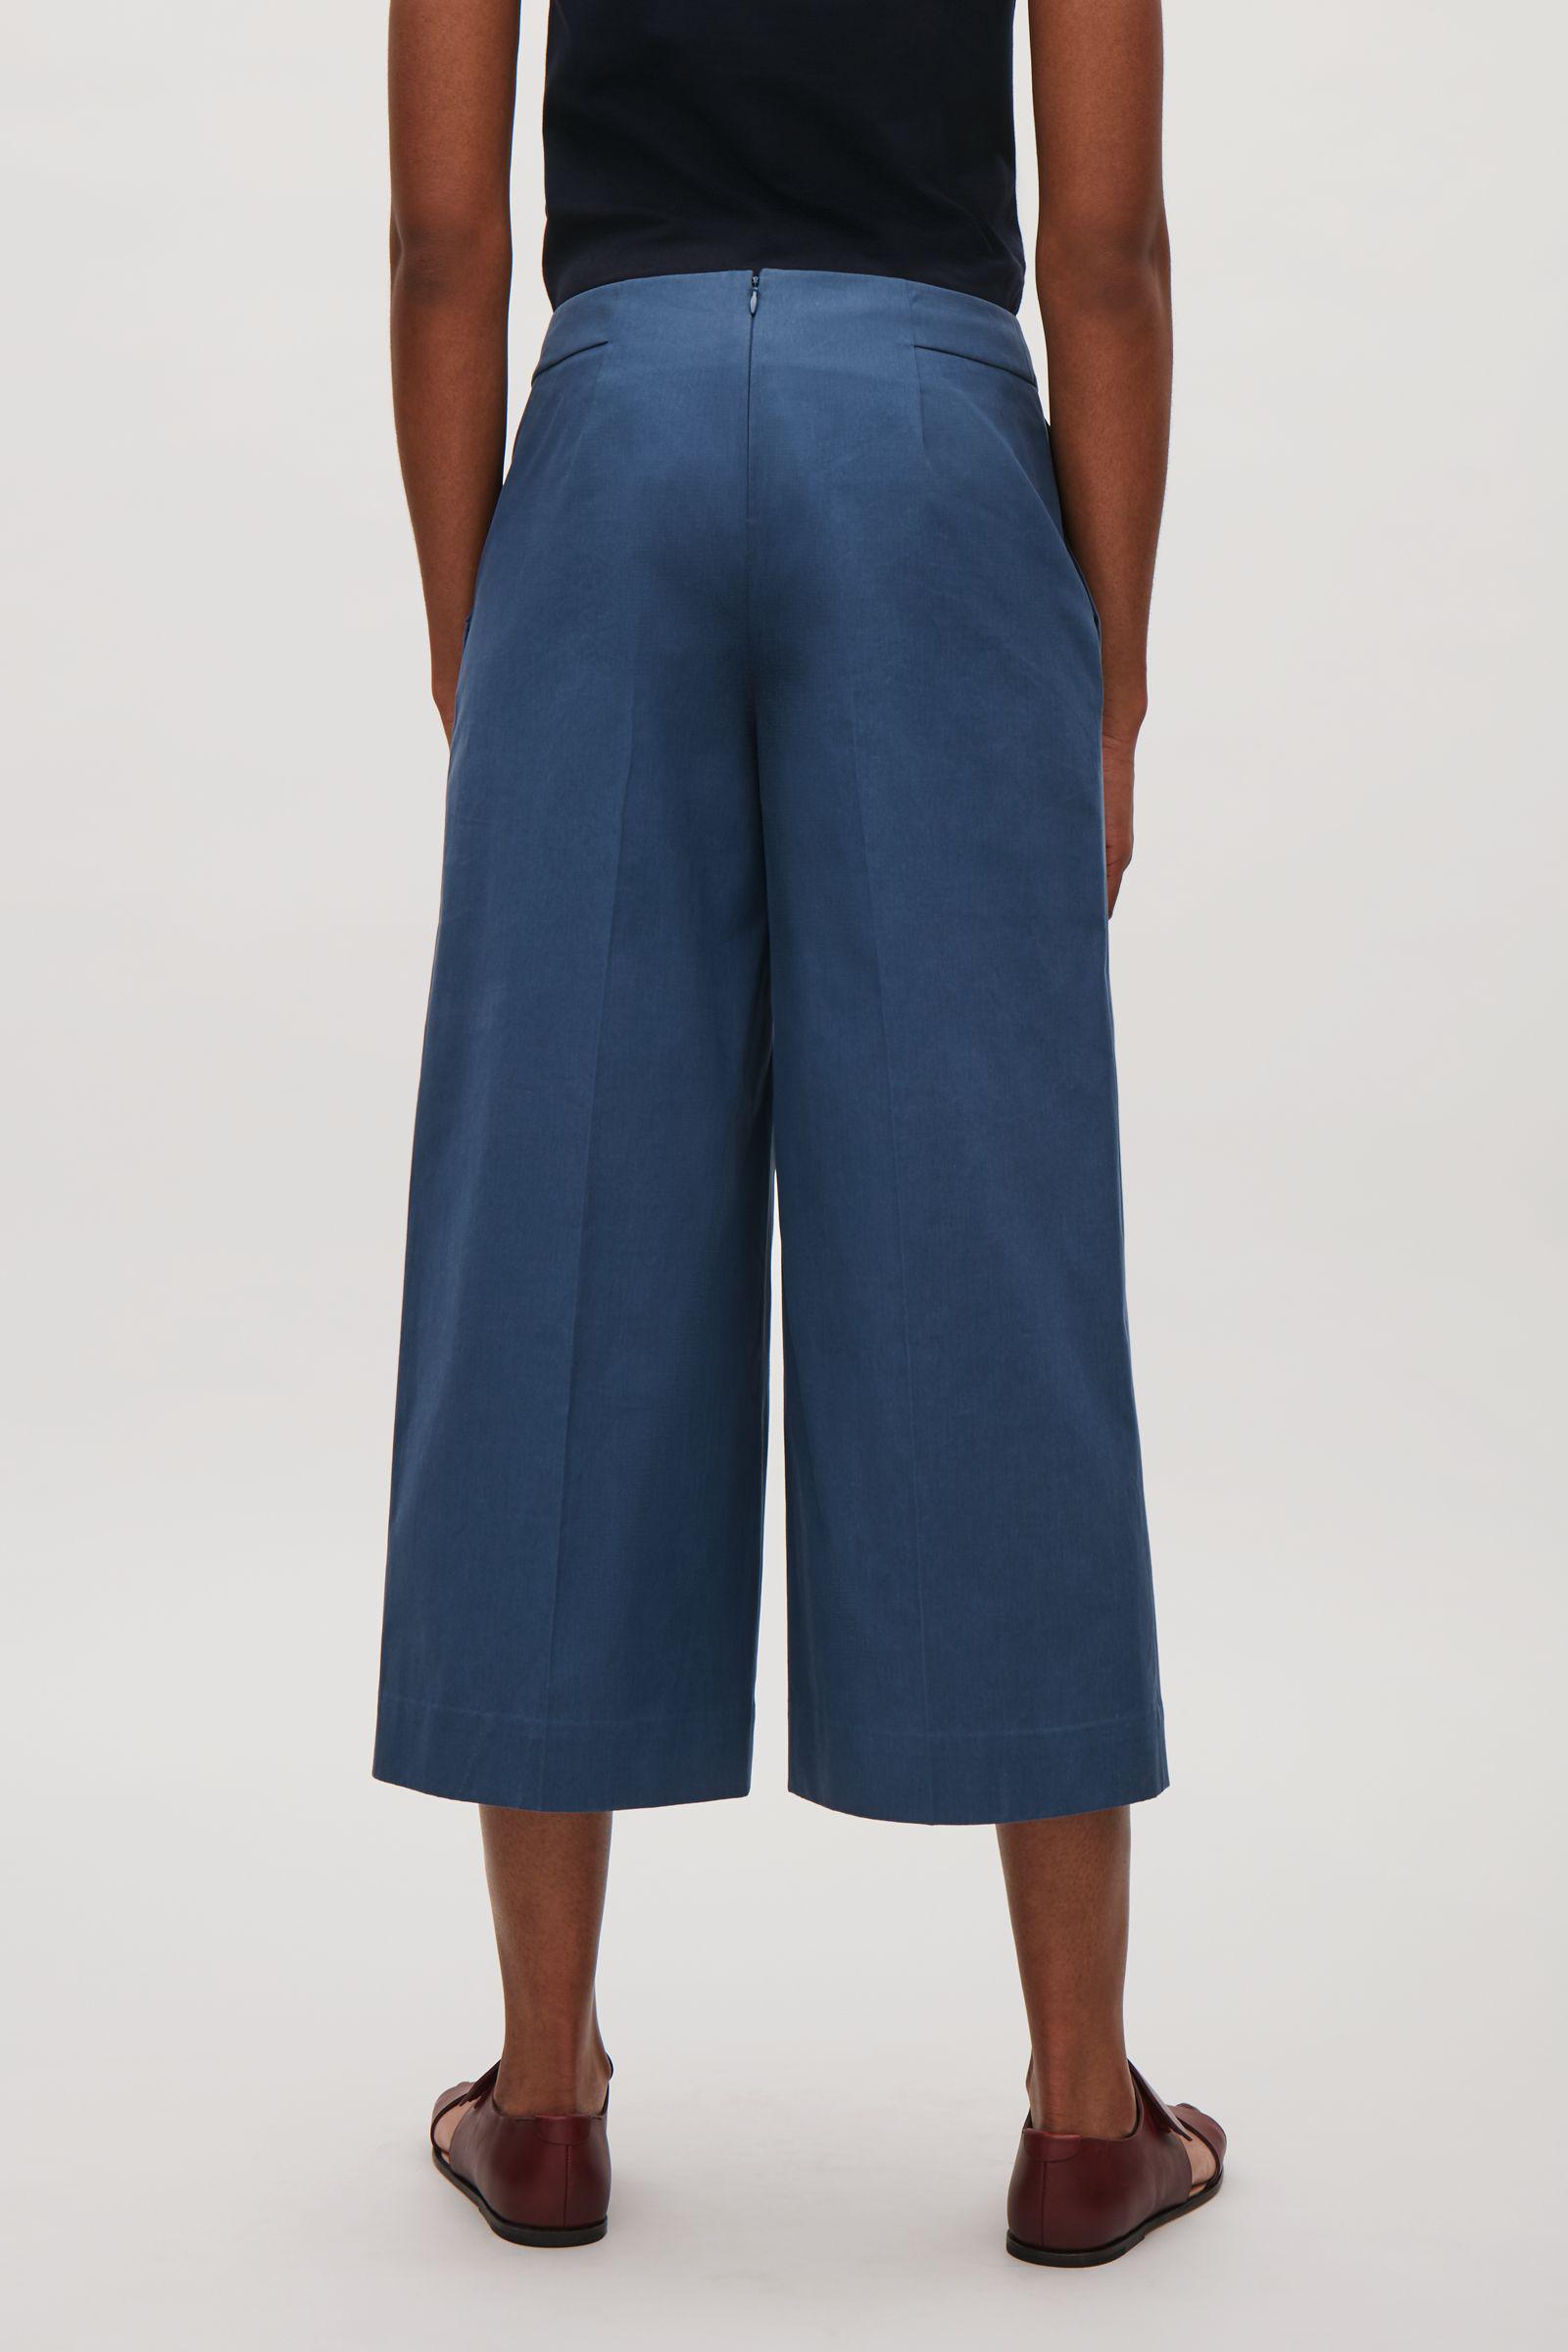 Lyst - Cos Cropped Wide-leg Trousers in Blue